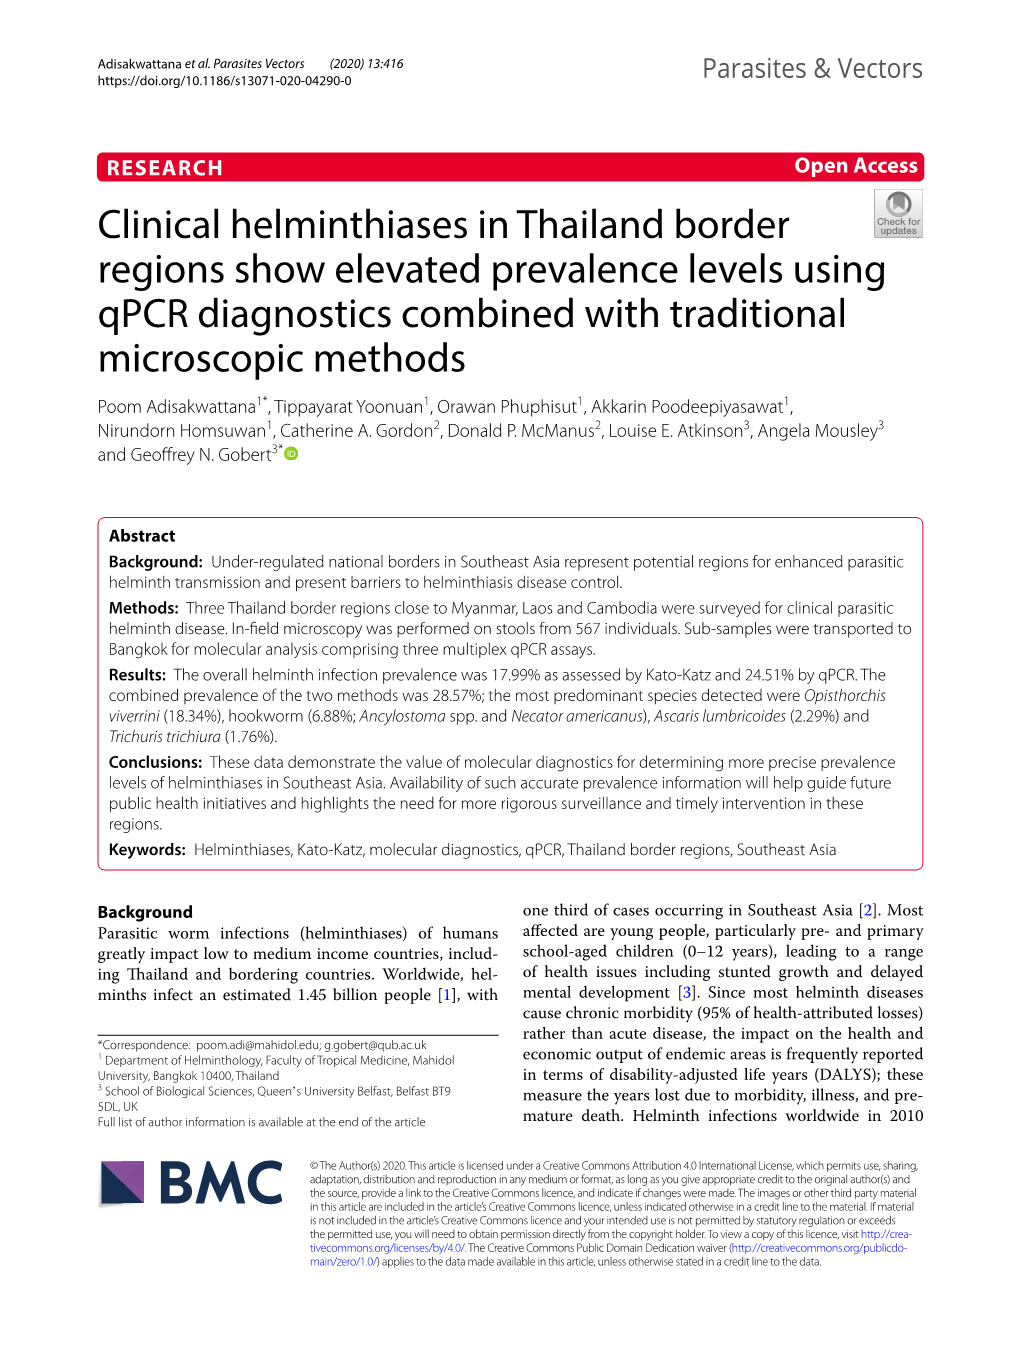 Clinical Helminthiases in Thailand Border Regions Show Elevated